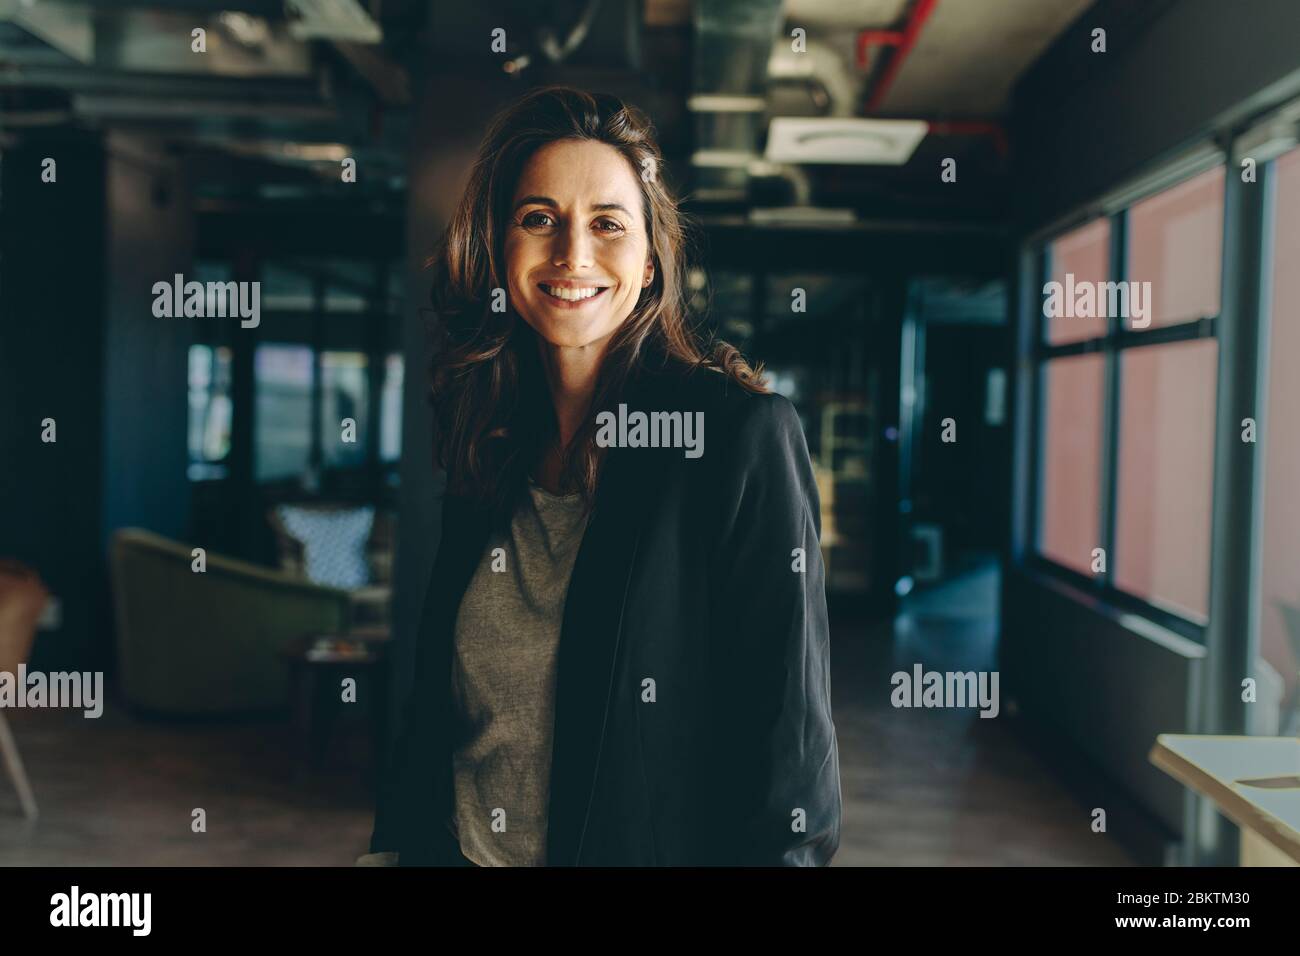 Smiling female executive standing in office. Woman in formal business attire looking at camera and smiling. Stock Photo